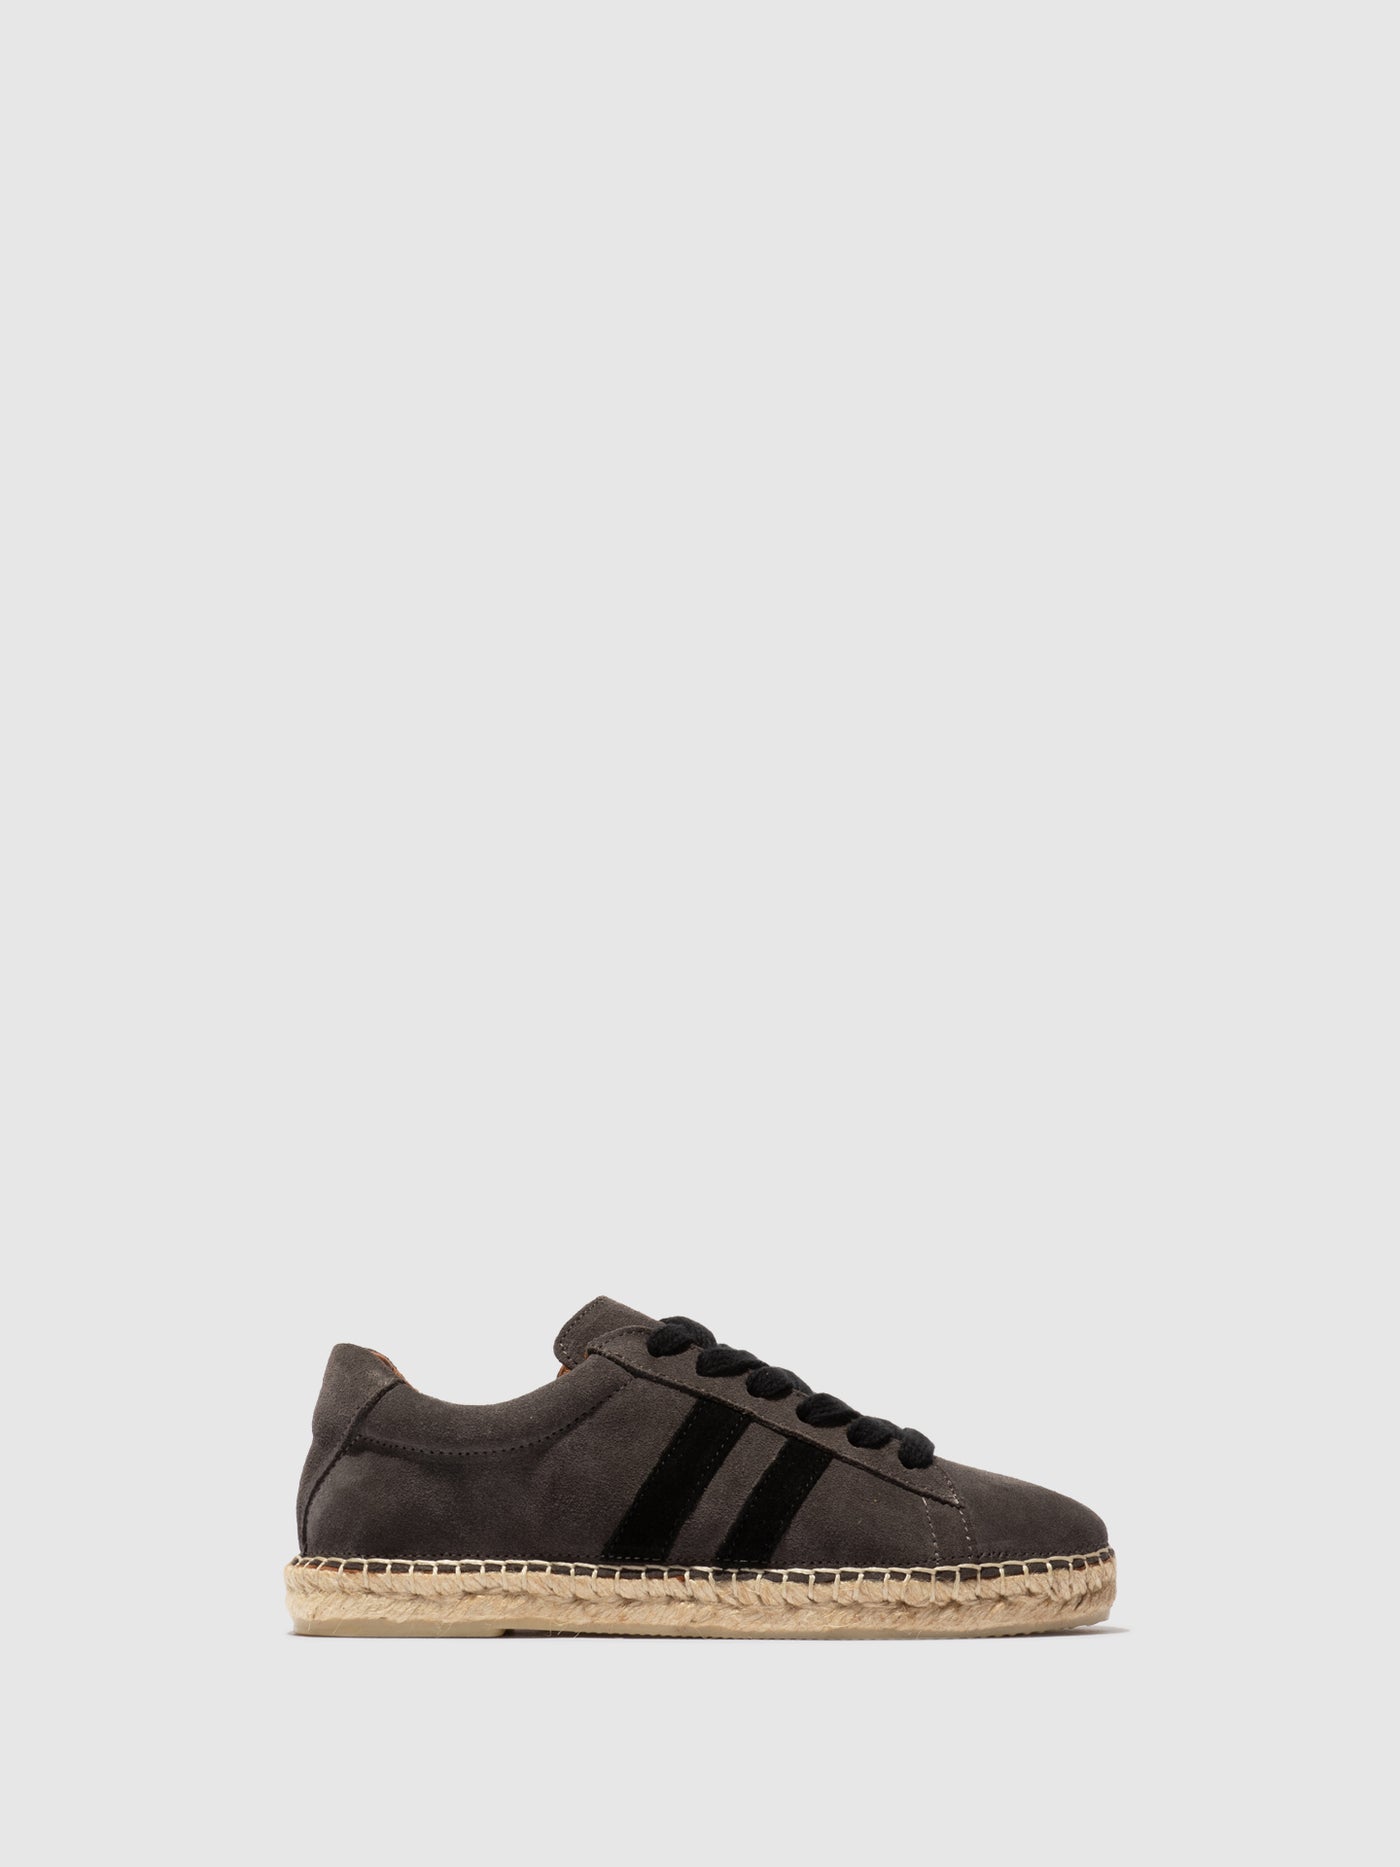 Lace-up Espadrilles SCAW530FLY GREY/BLACK